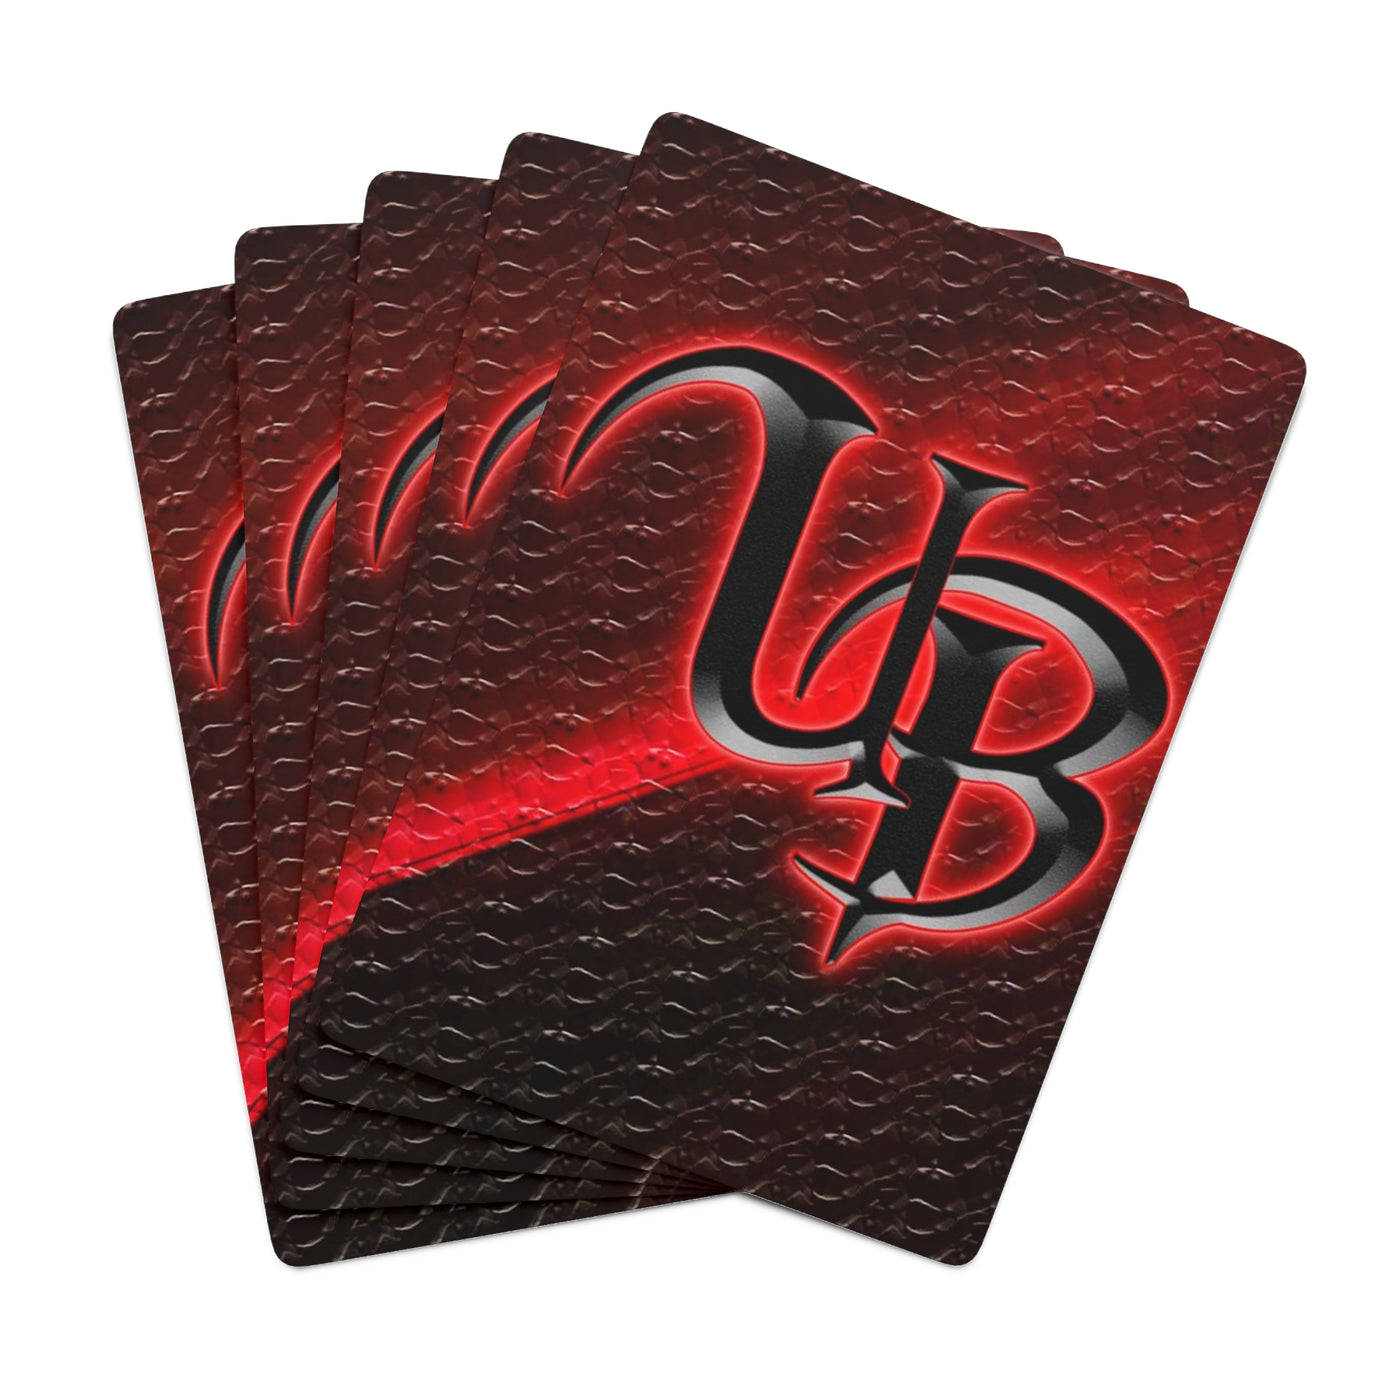 Custom Poker Cards - Personalized deck of playing cards designed for poker games or card playing, featuring customized designs or images